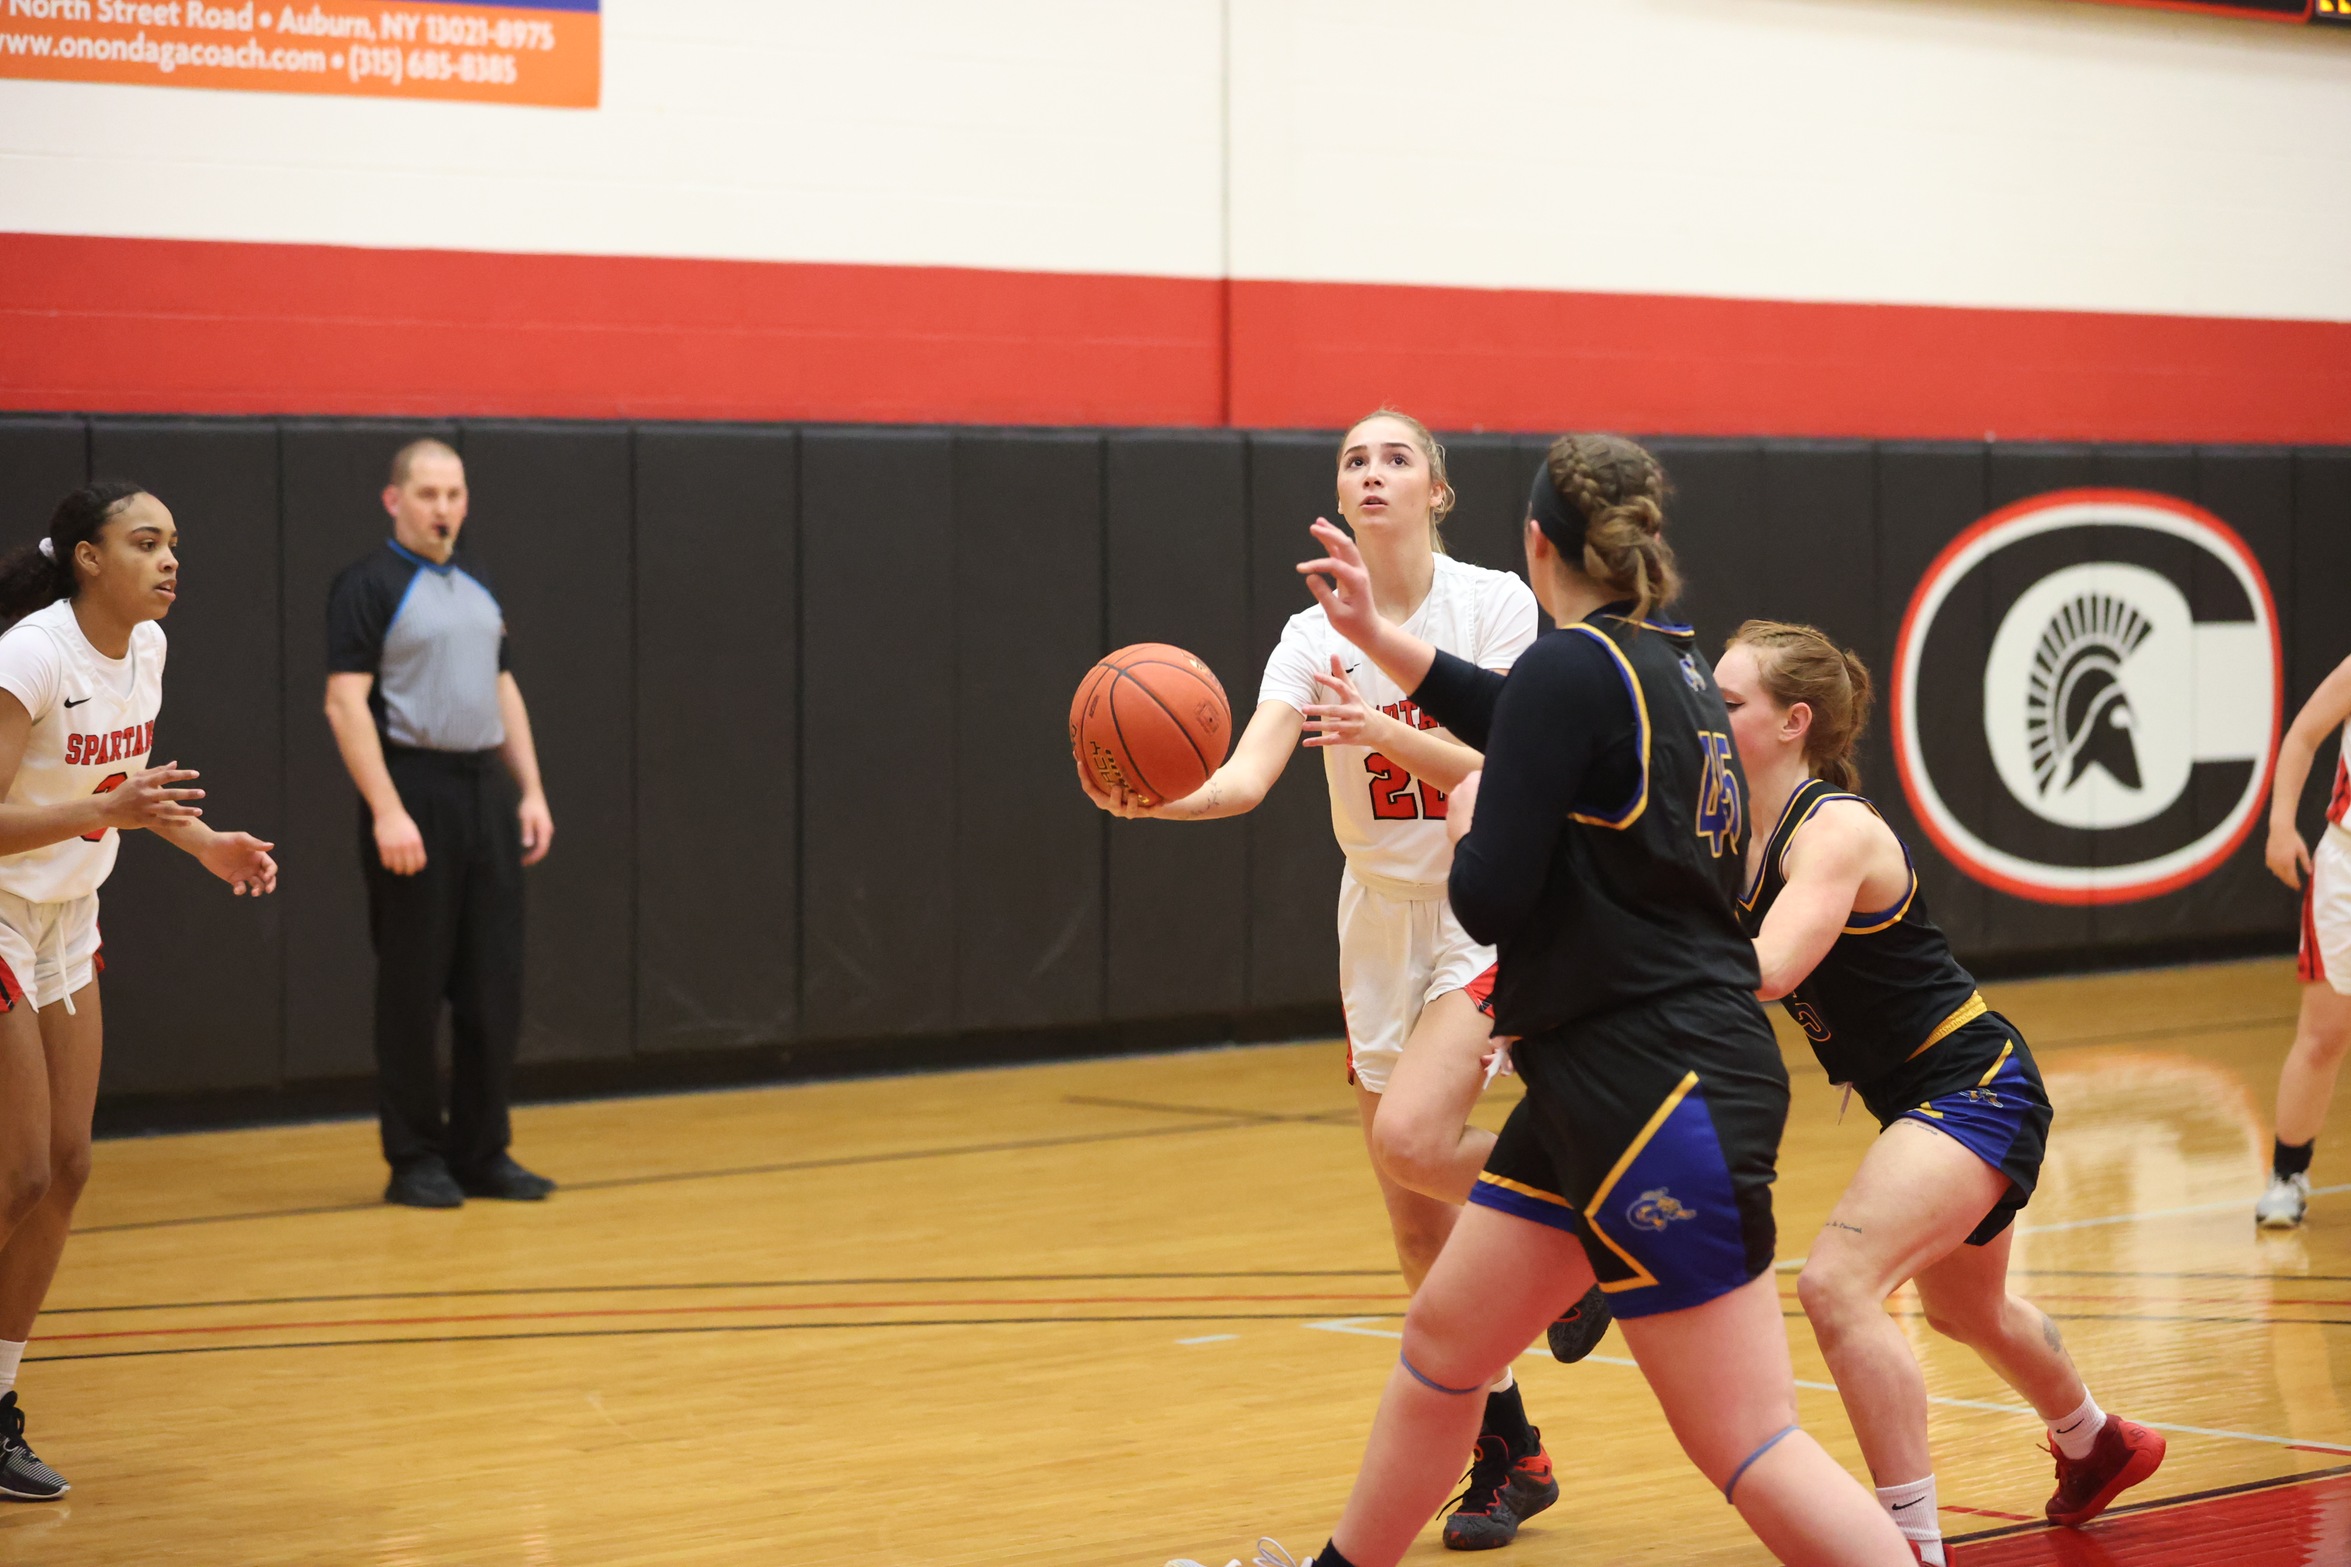 Haley Mosch had 18 points, 9 rebounds and 5 steals on Sunday.